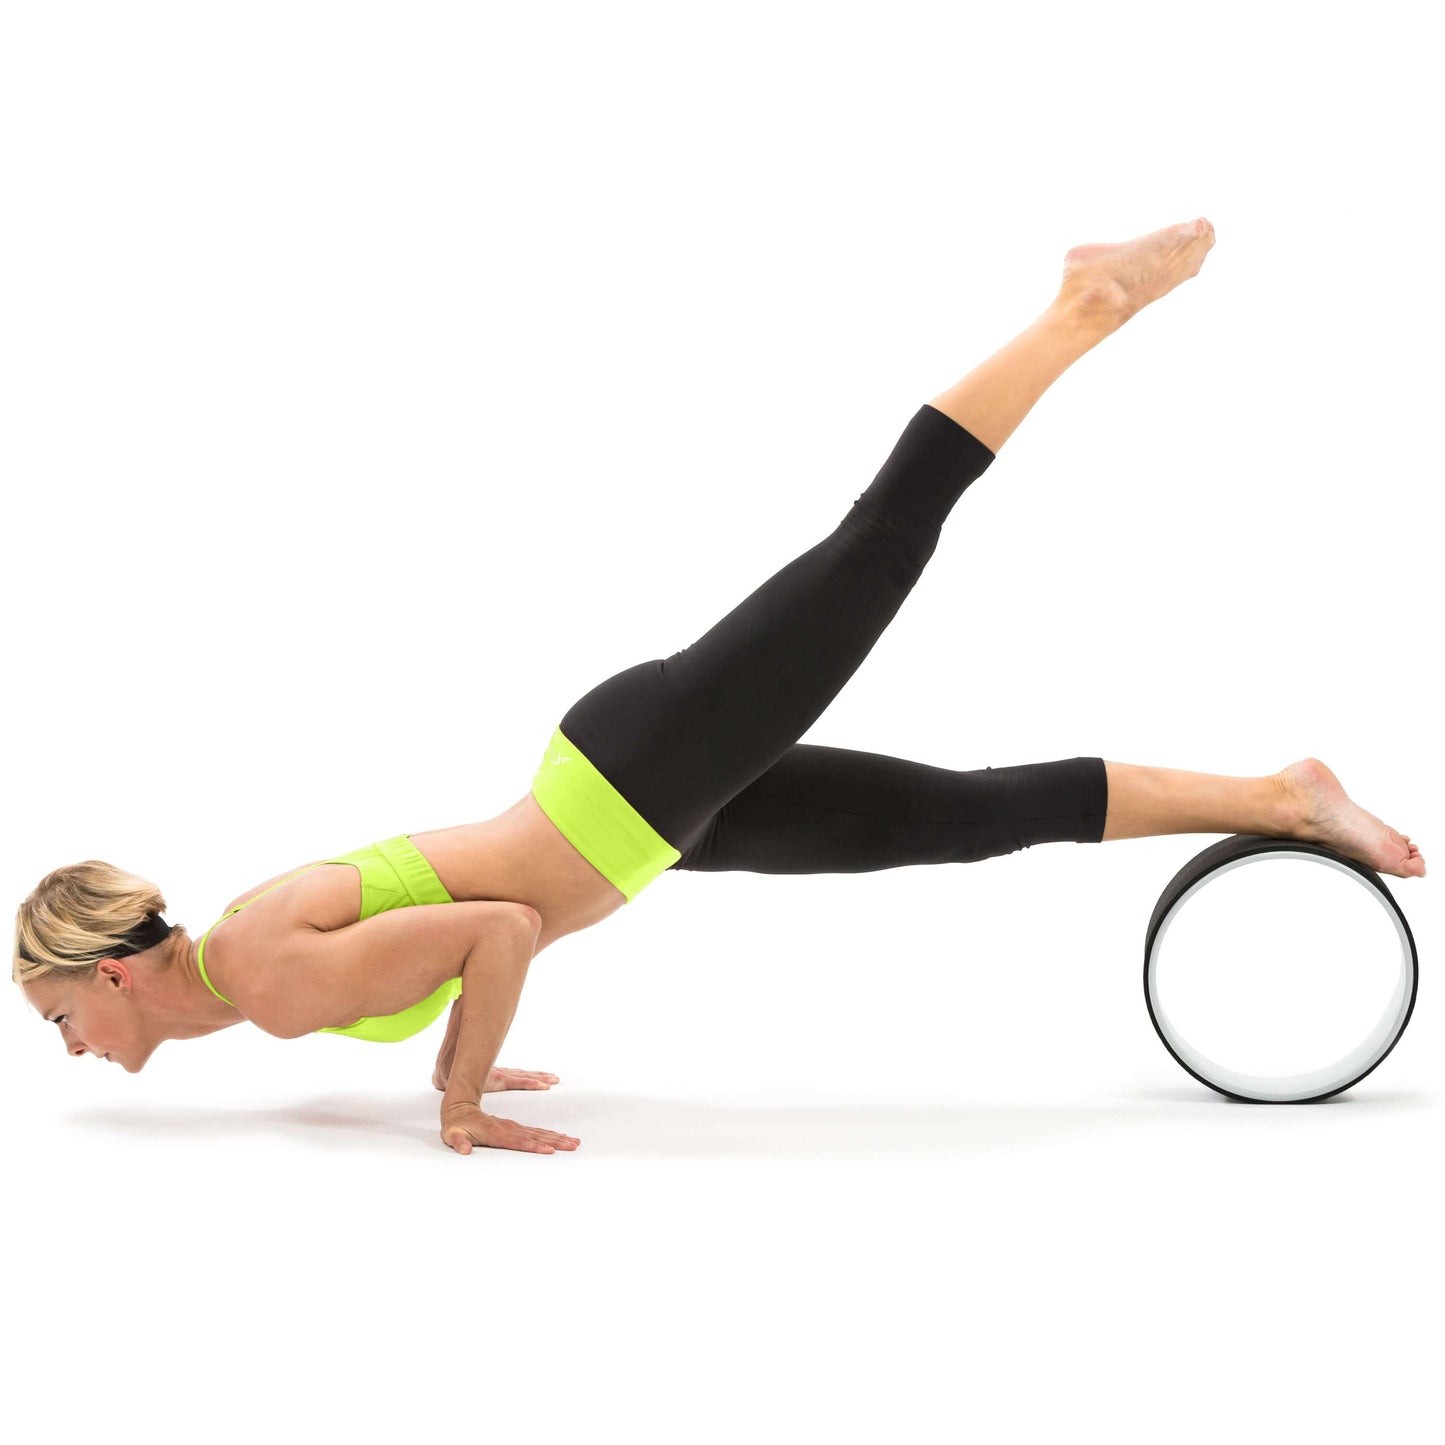 12" Yoga Wheel For Yoga Poses and Back Pain by Jupiter Gear